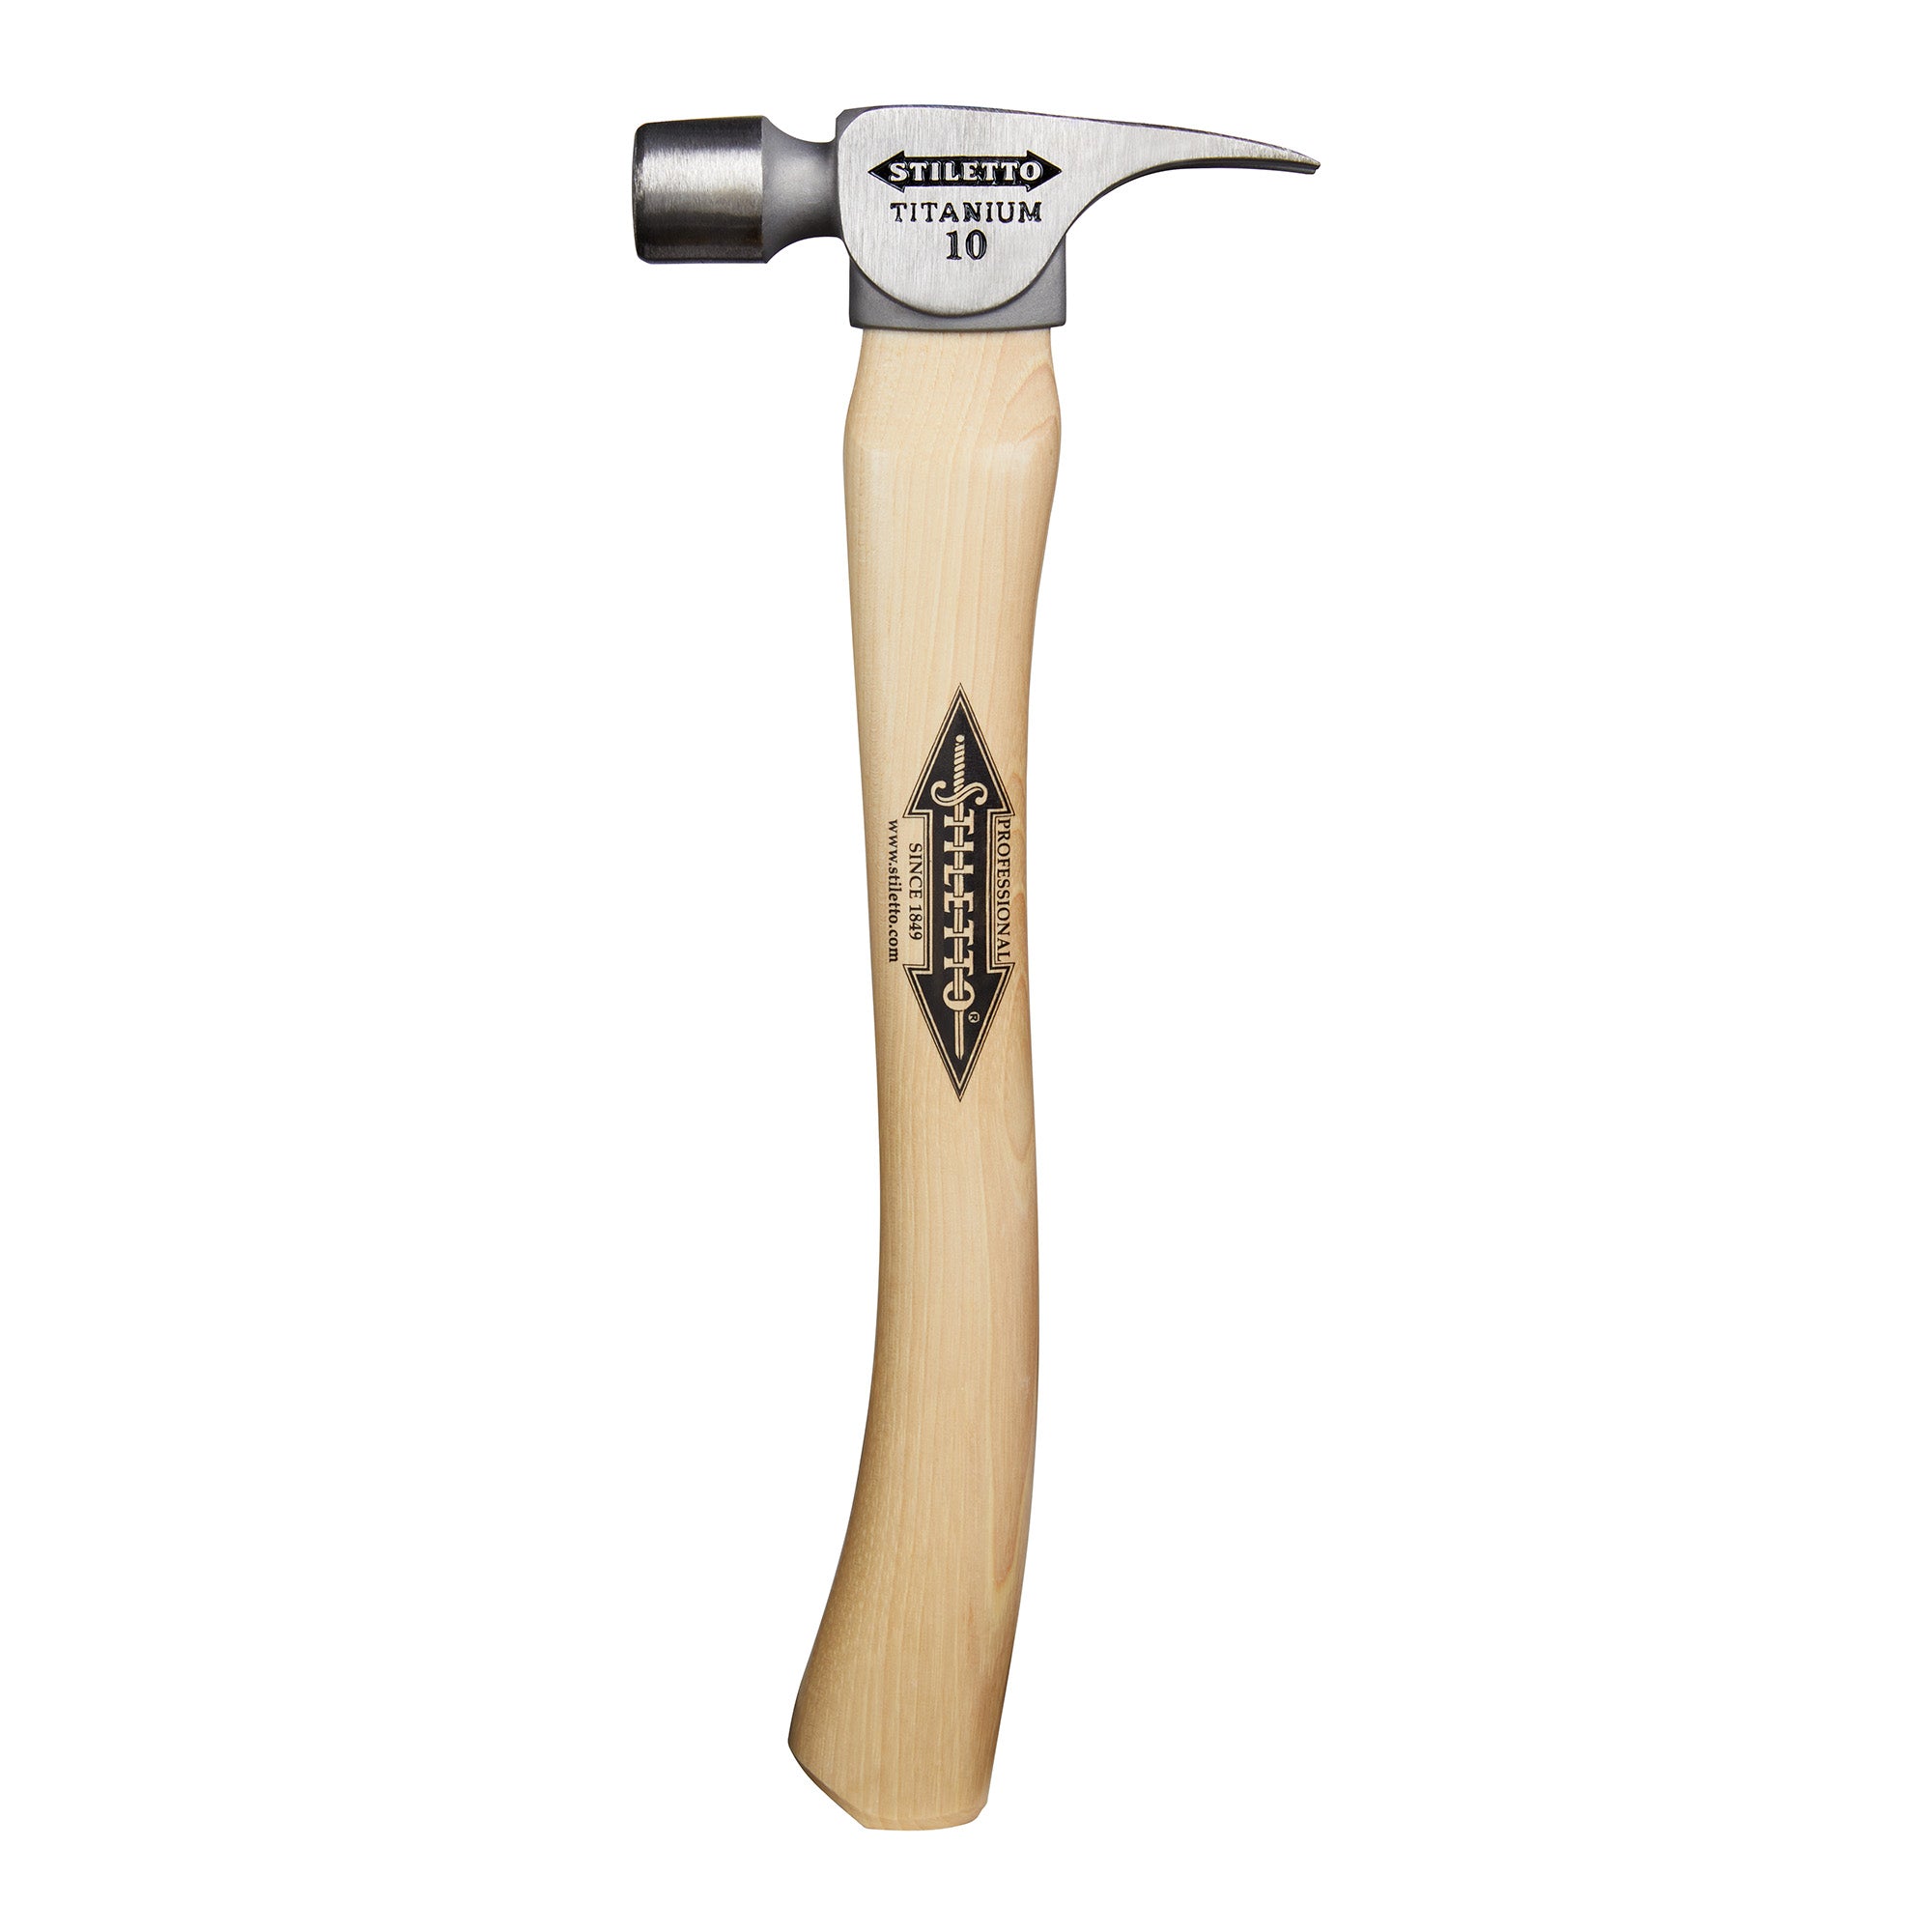 14-1/2" Hickory Straight Handle 10 oz. Titanium Head Smooth Round Face Straight Claw Finish Hammer